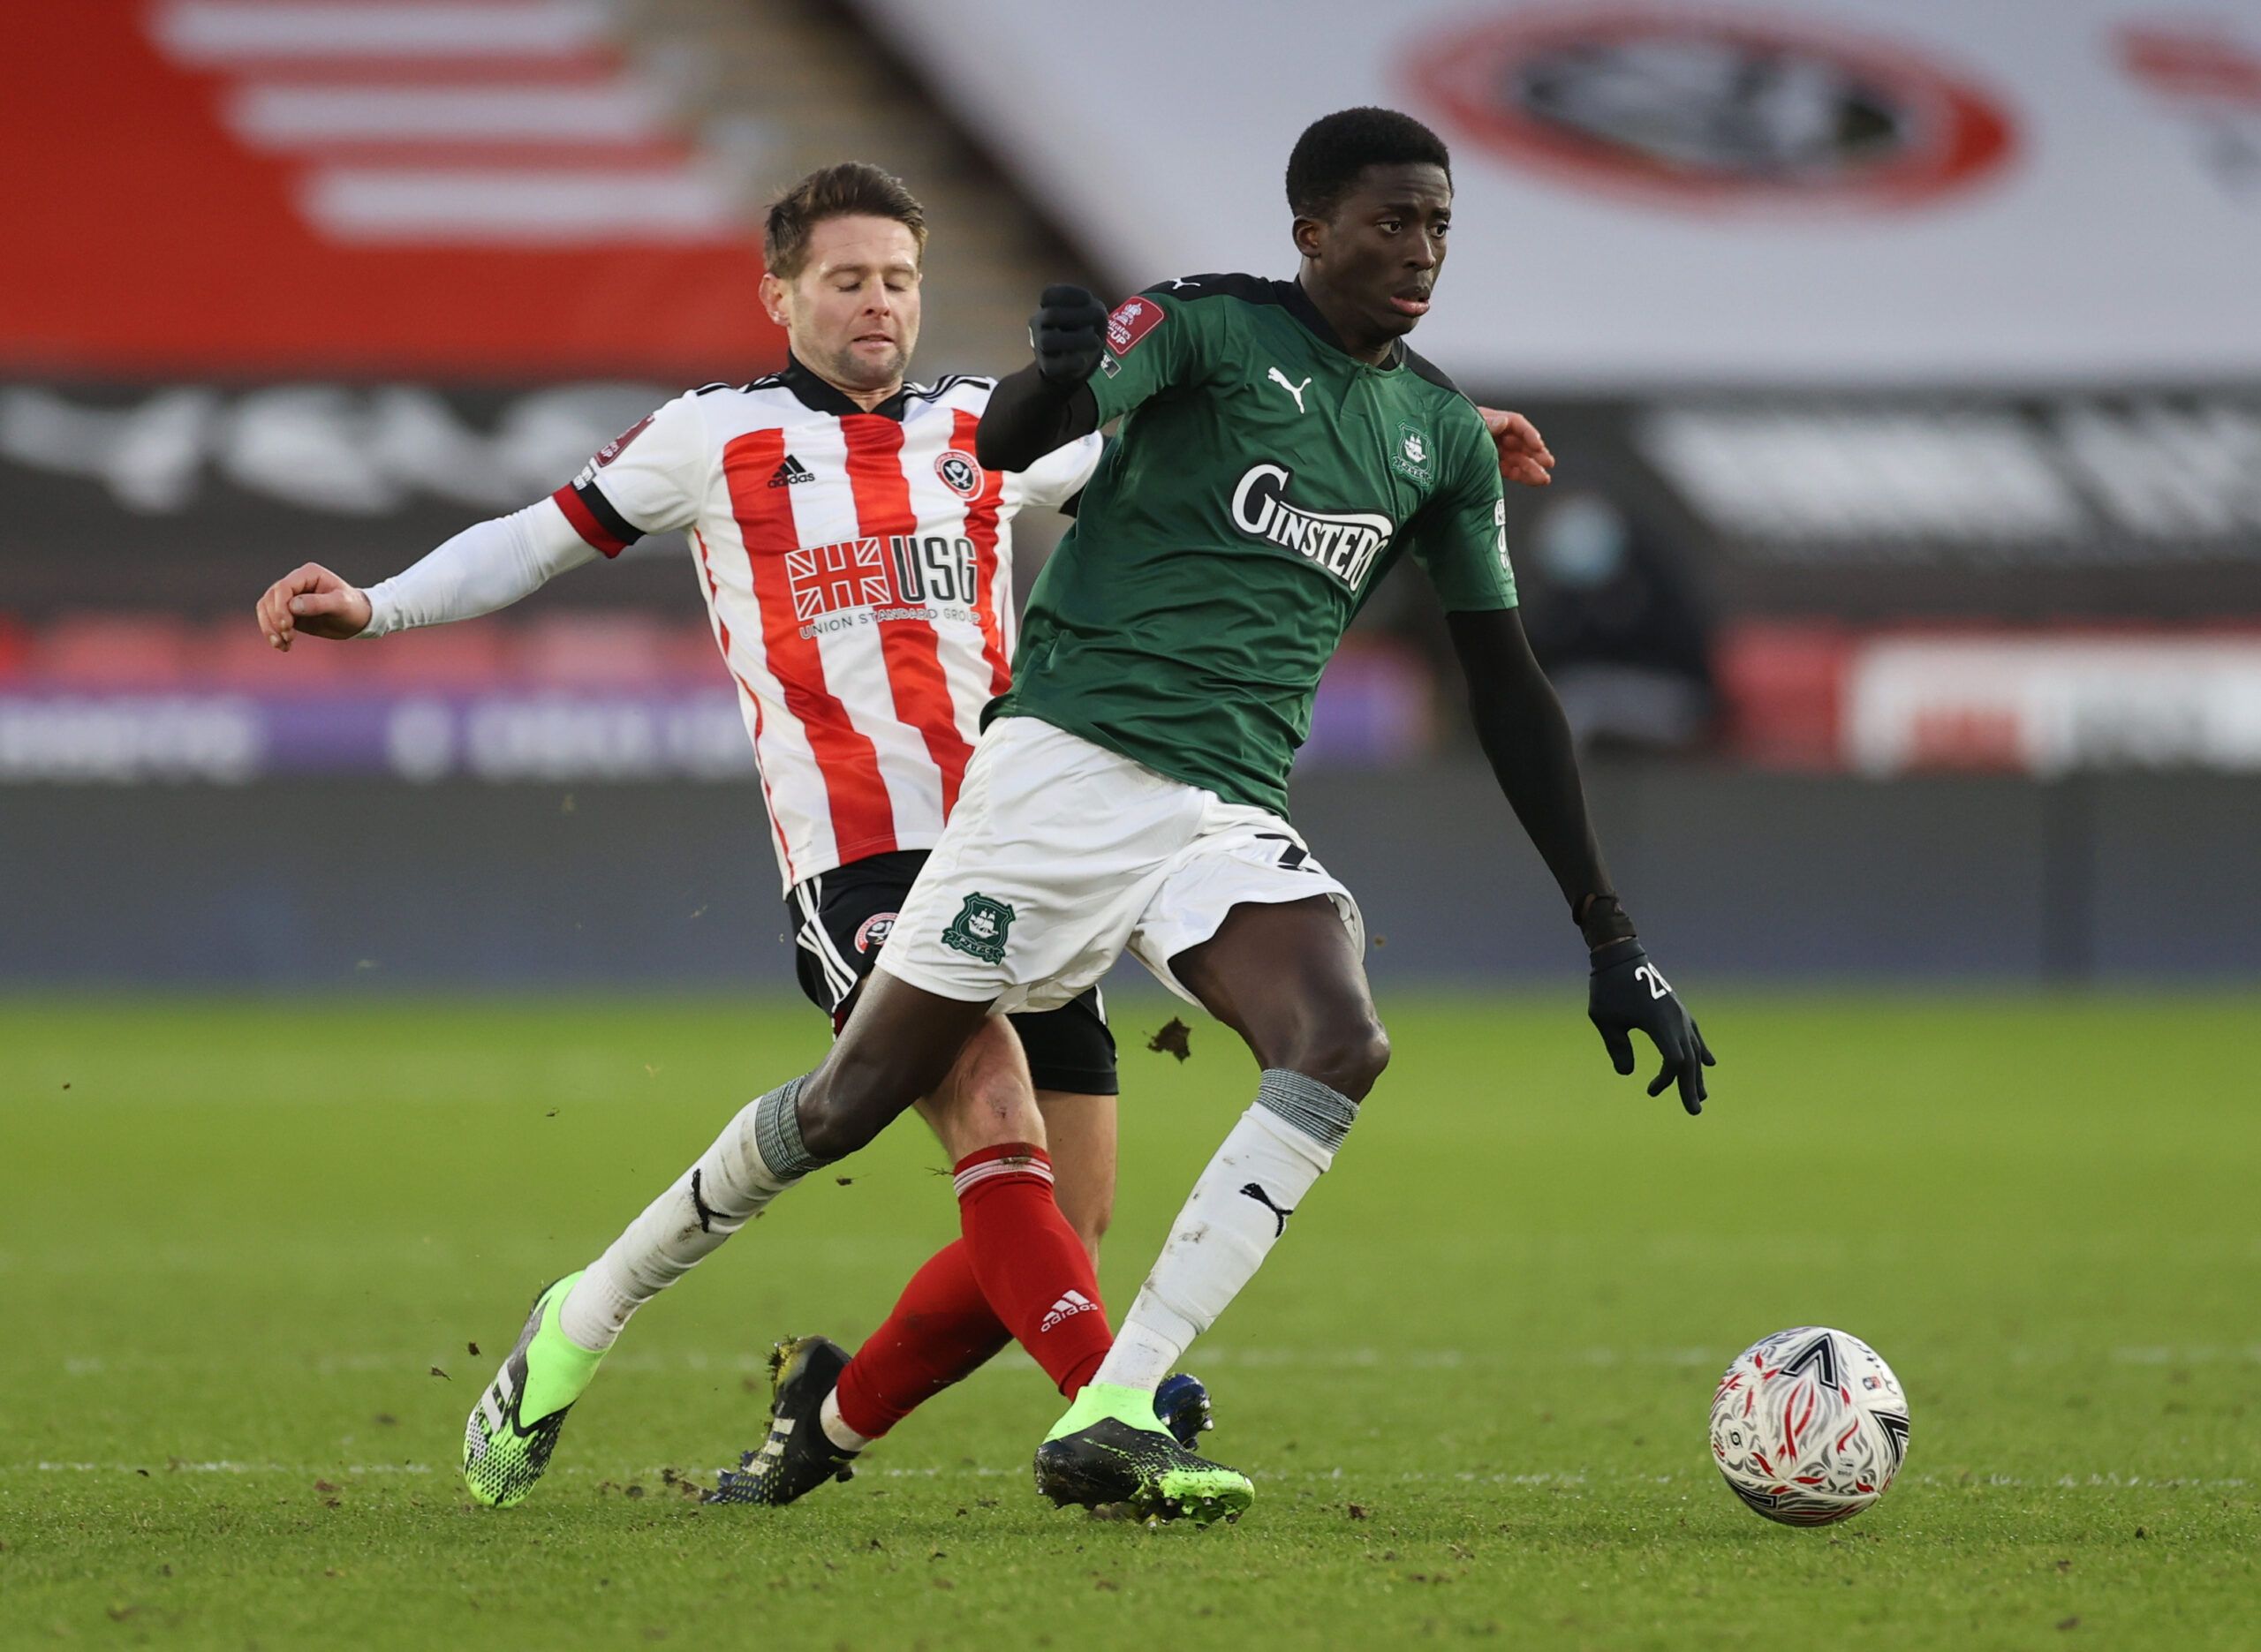 Soccer Football - FA Cup - Fourth Round - Sheffield United v Plymouth Argyle - Bramall Lane, Sheffield, Britain - January 23, 2021 Sheffield United's Oliver Norwood in action with Plymouth Argyle's Panutche Camara Action Images via Reuters/Lee Smith